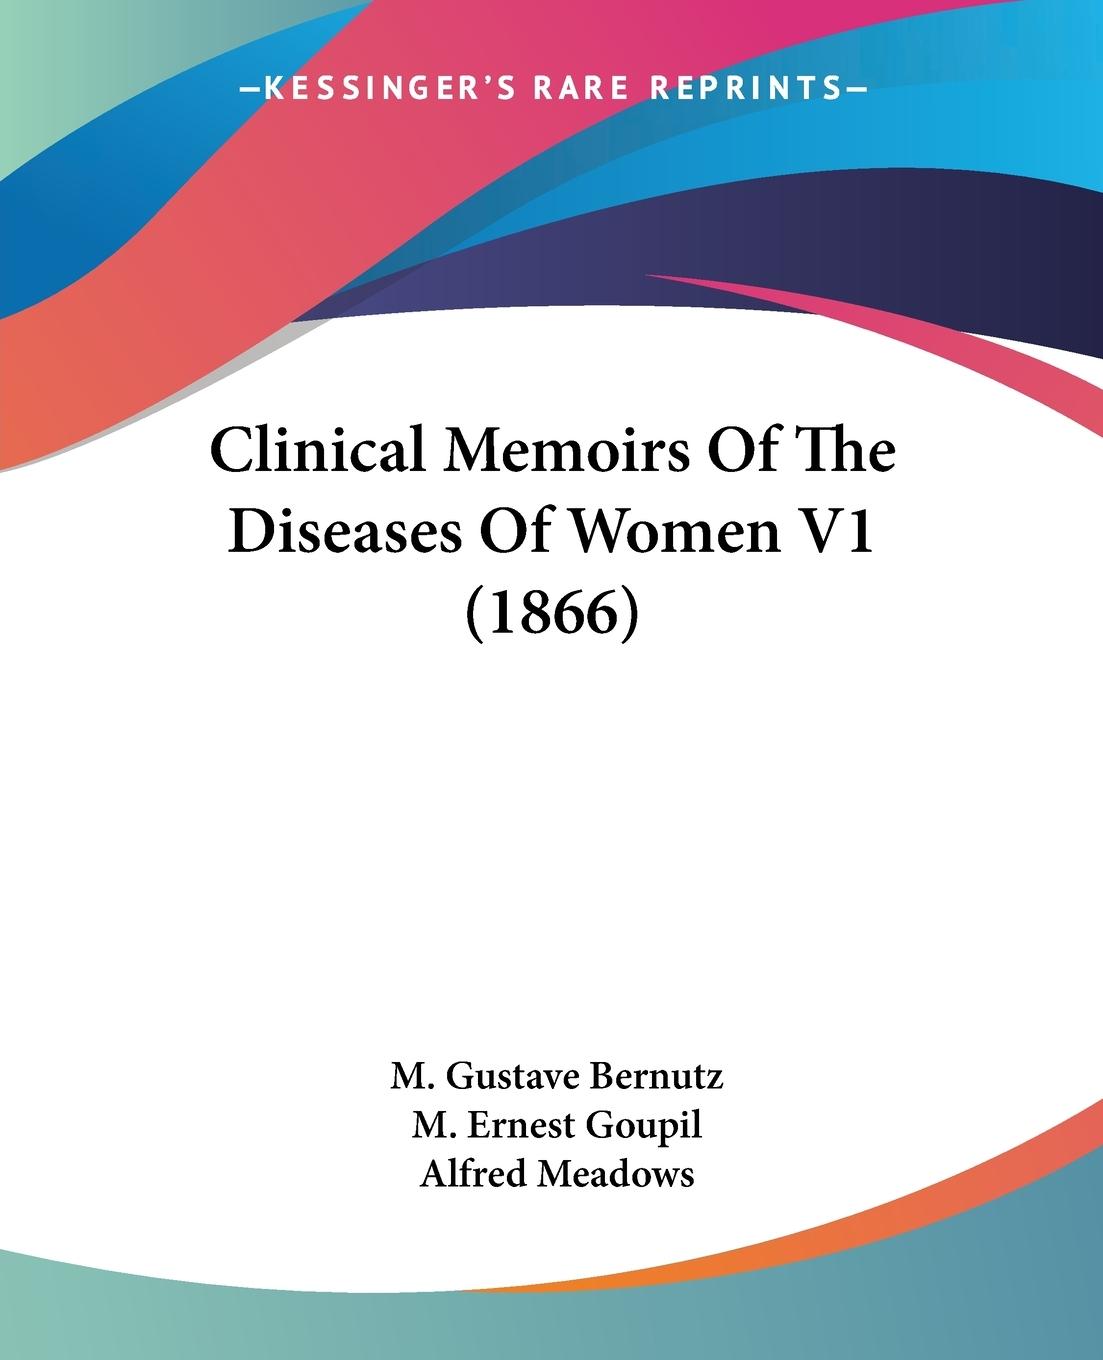 Clinical Memoirs Of The Diseases Of Women V1 (1866) - Bernutz, M. Gustave Goupil, M. Ernest